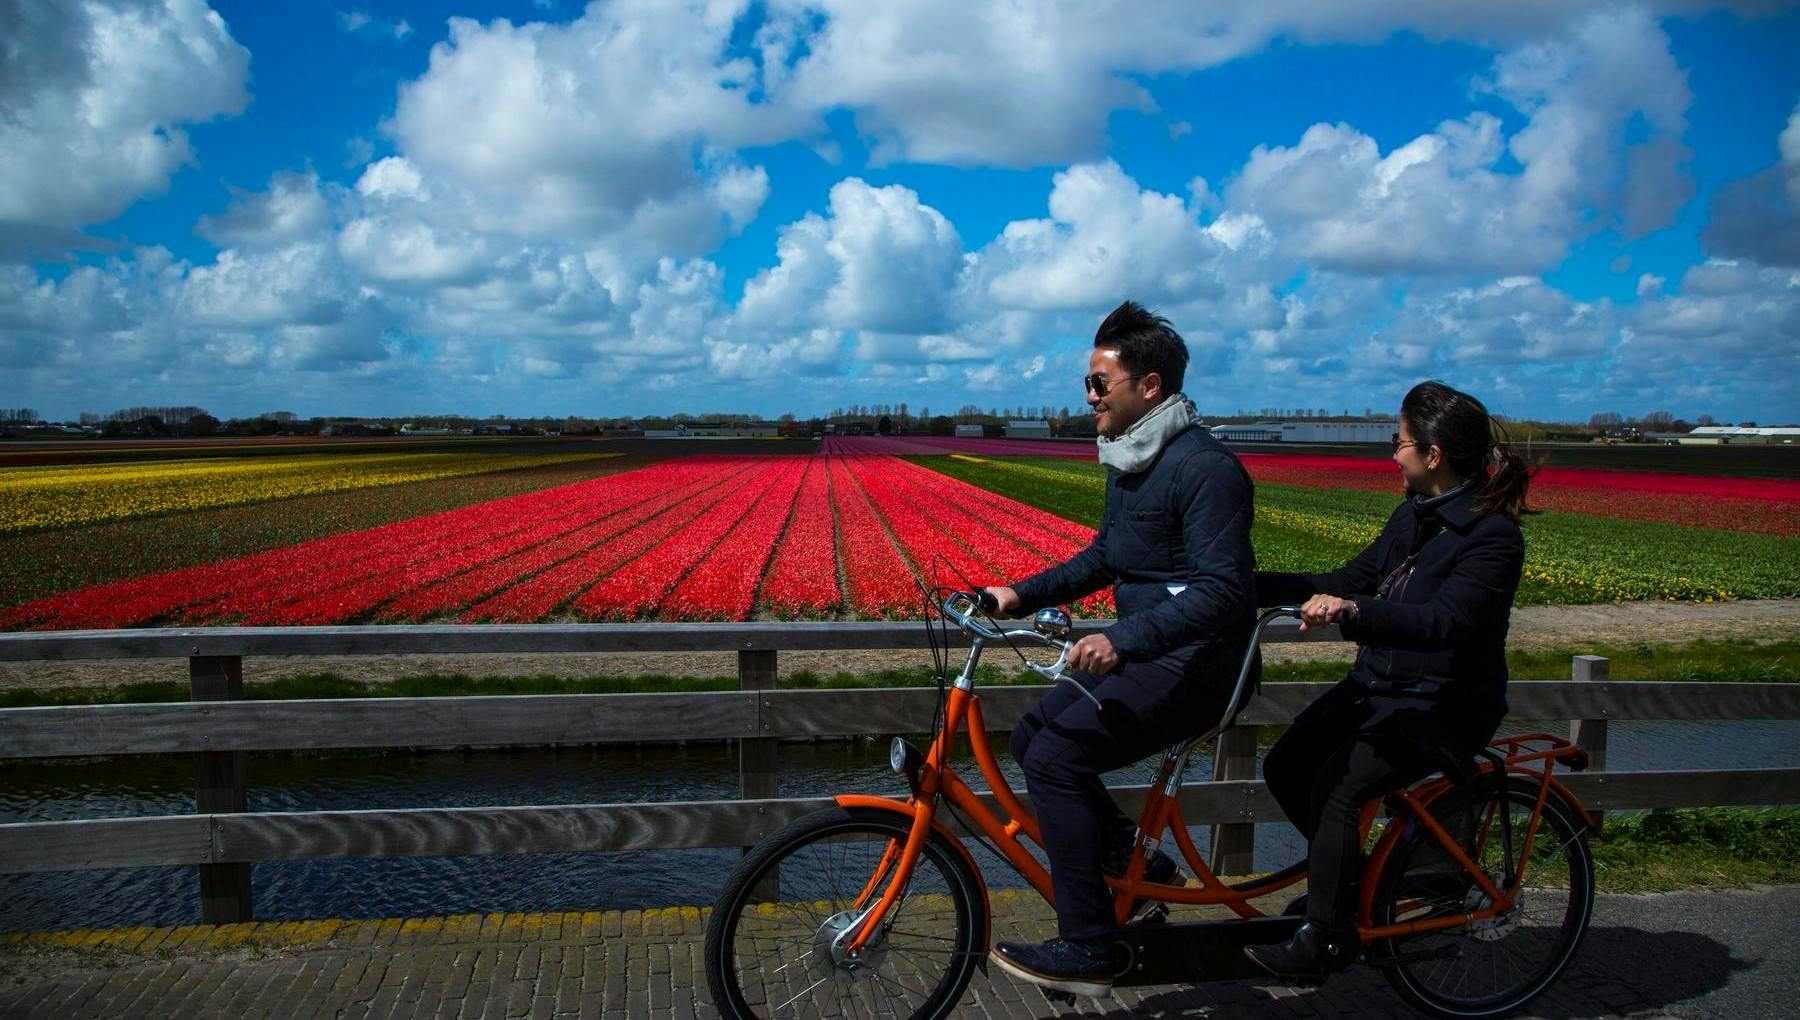 Flowers of Amsterdam Cycleseeing Route: Holland in bloom